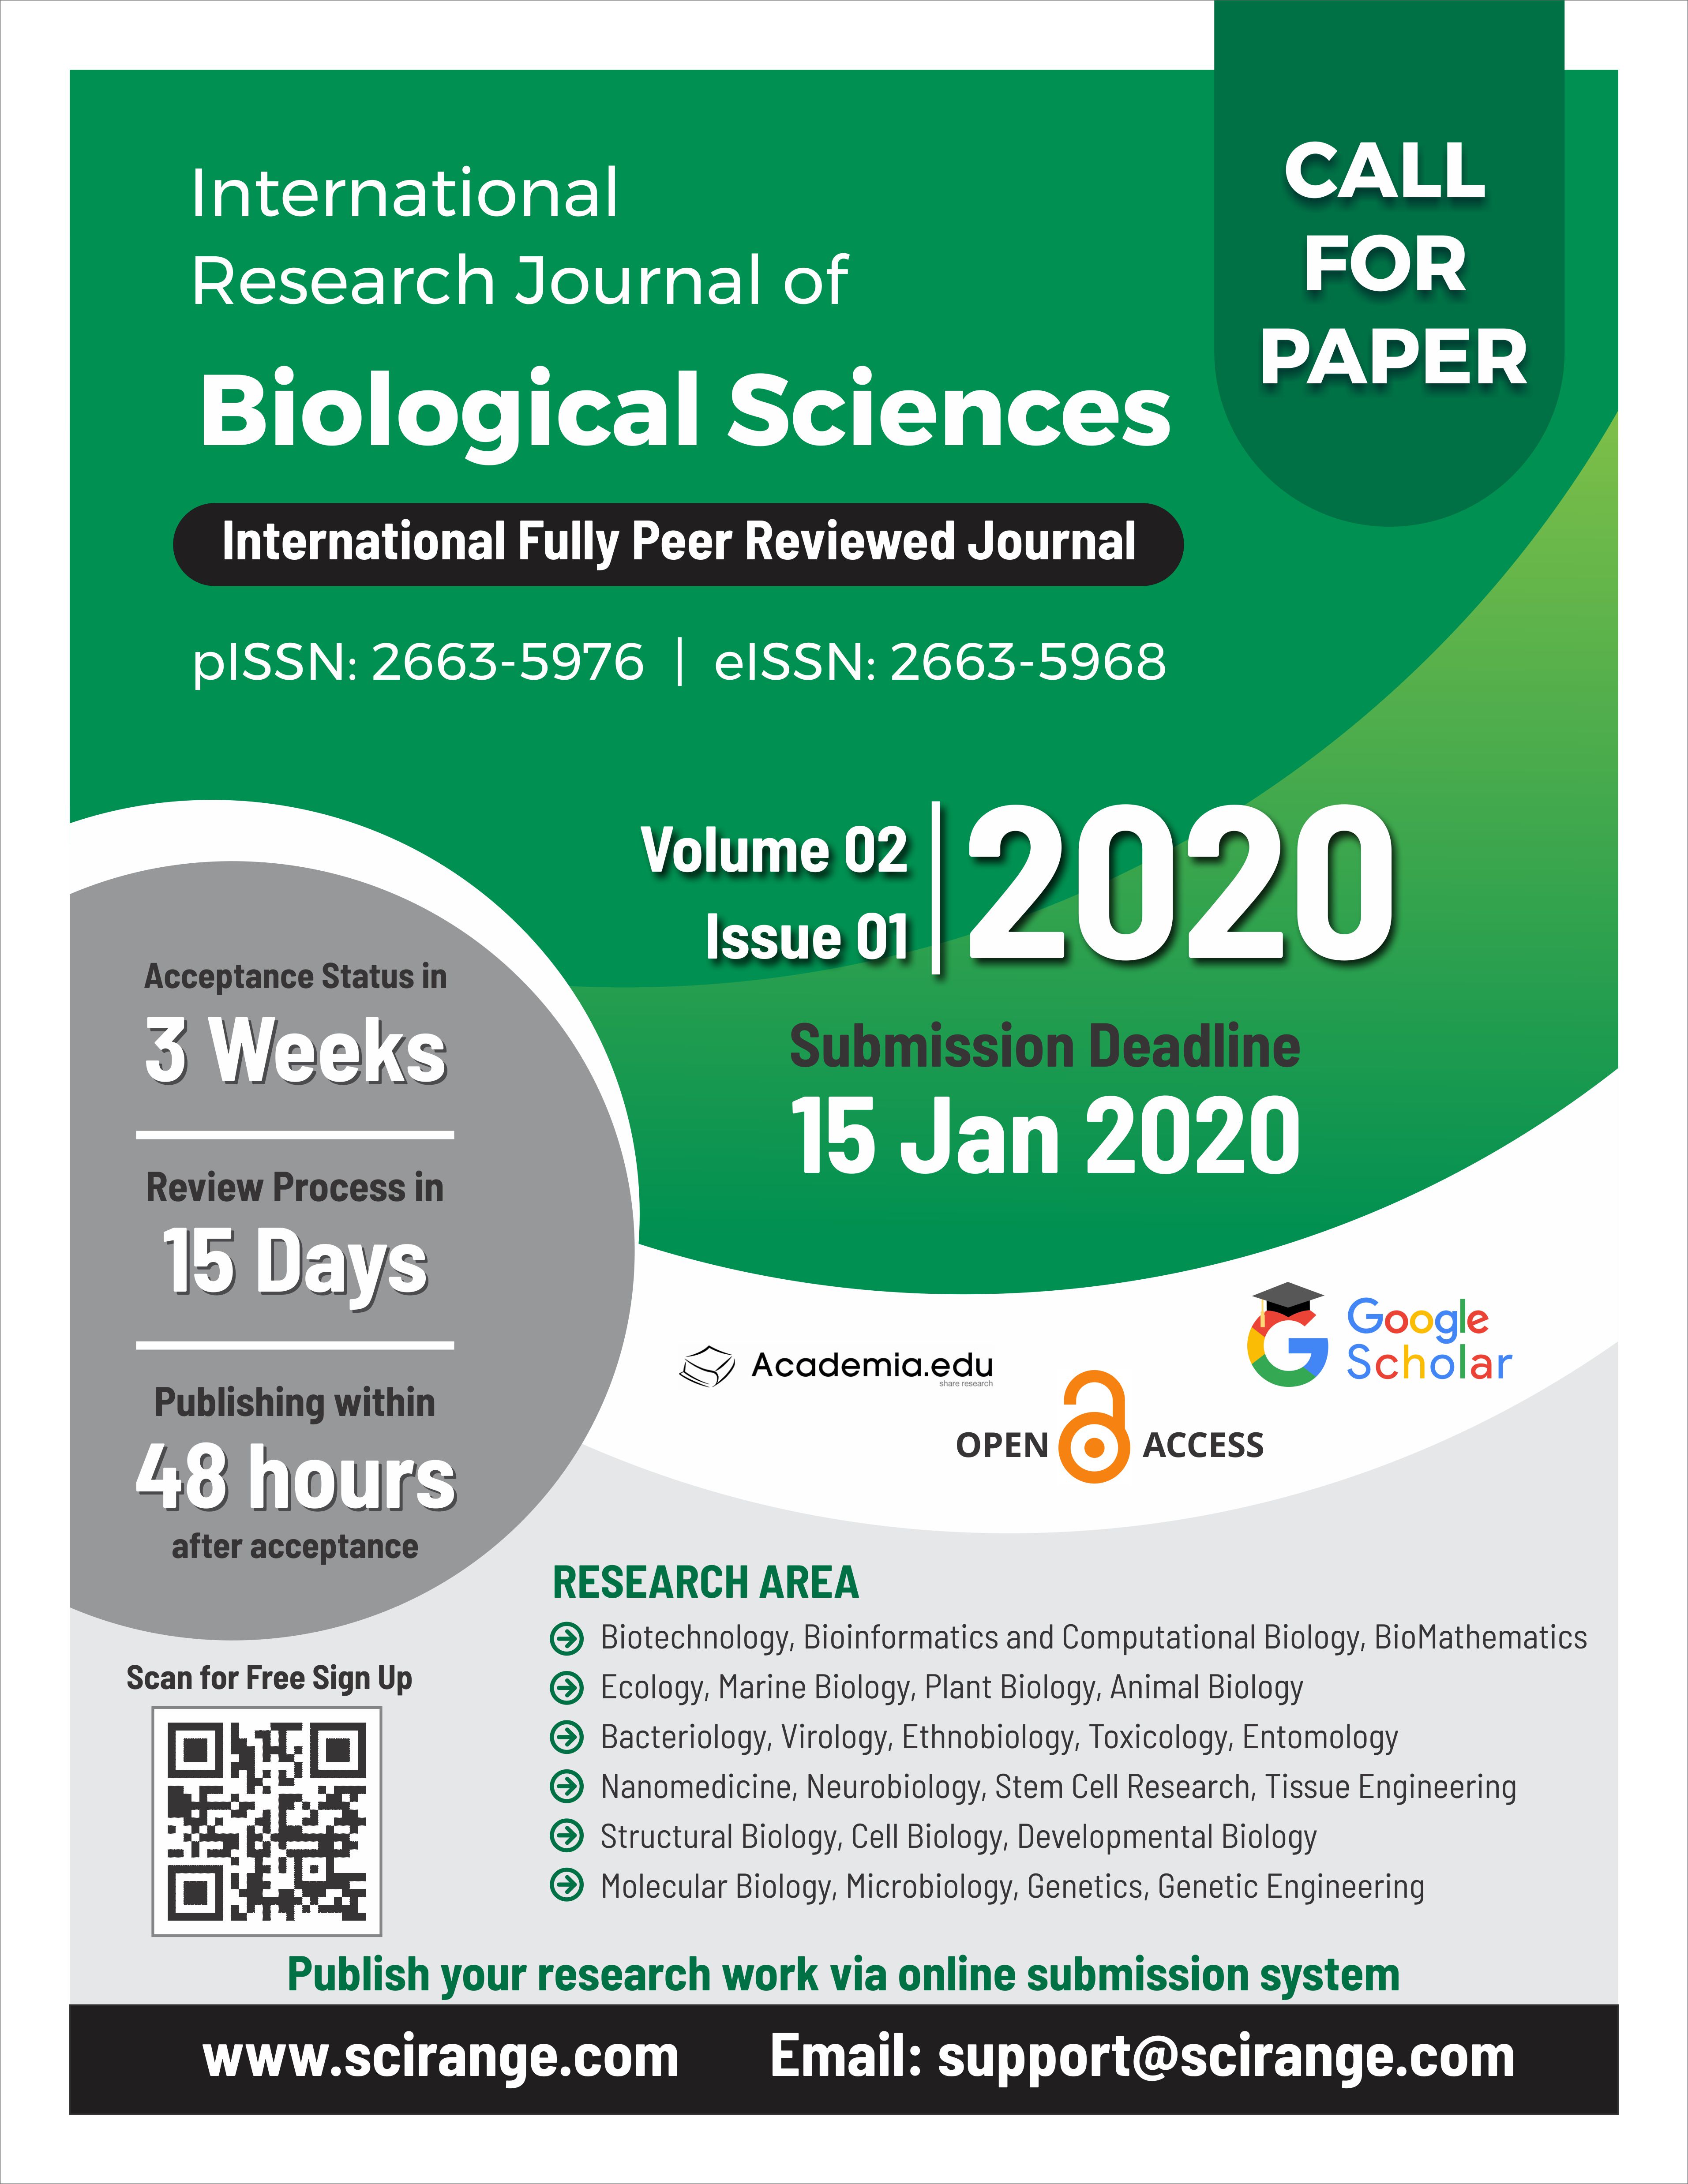 International Research Journal of Biological Sciences